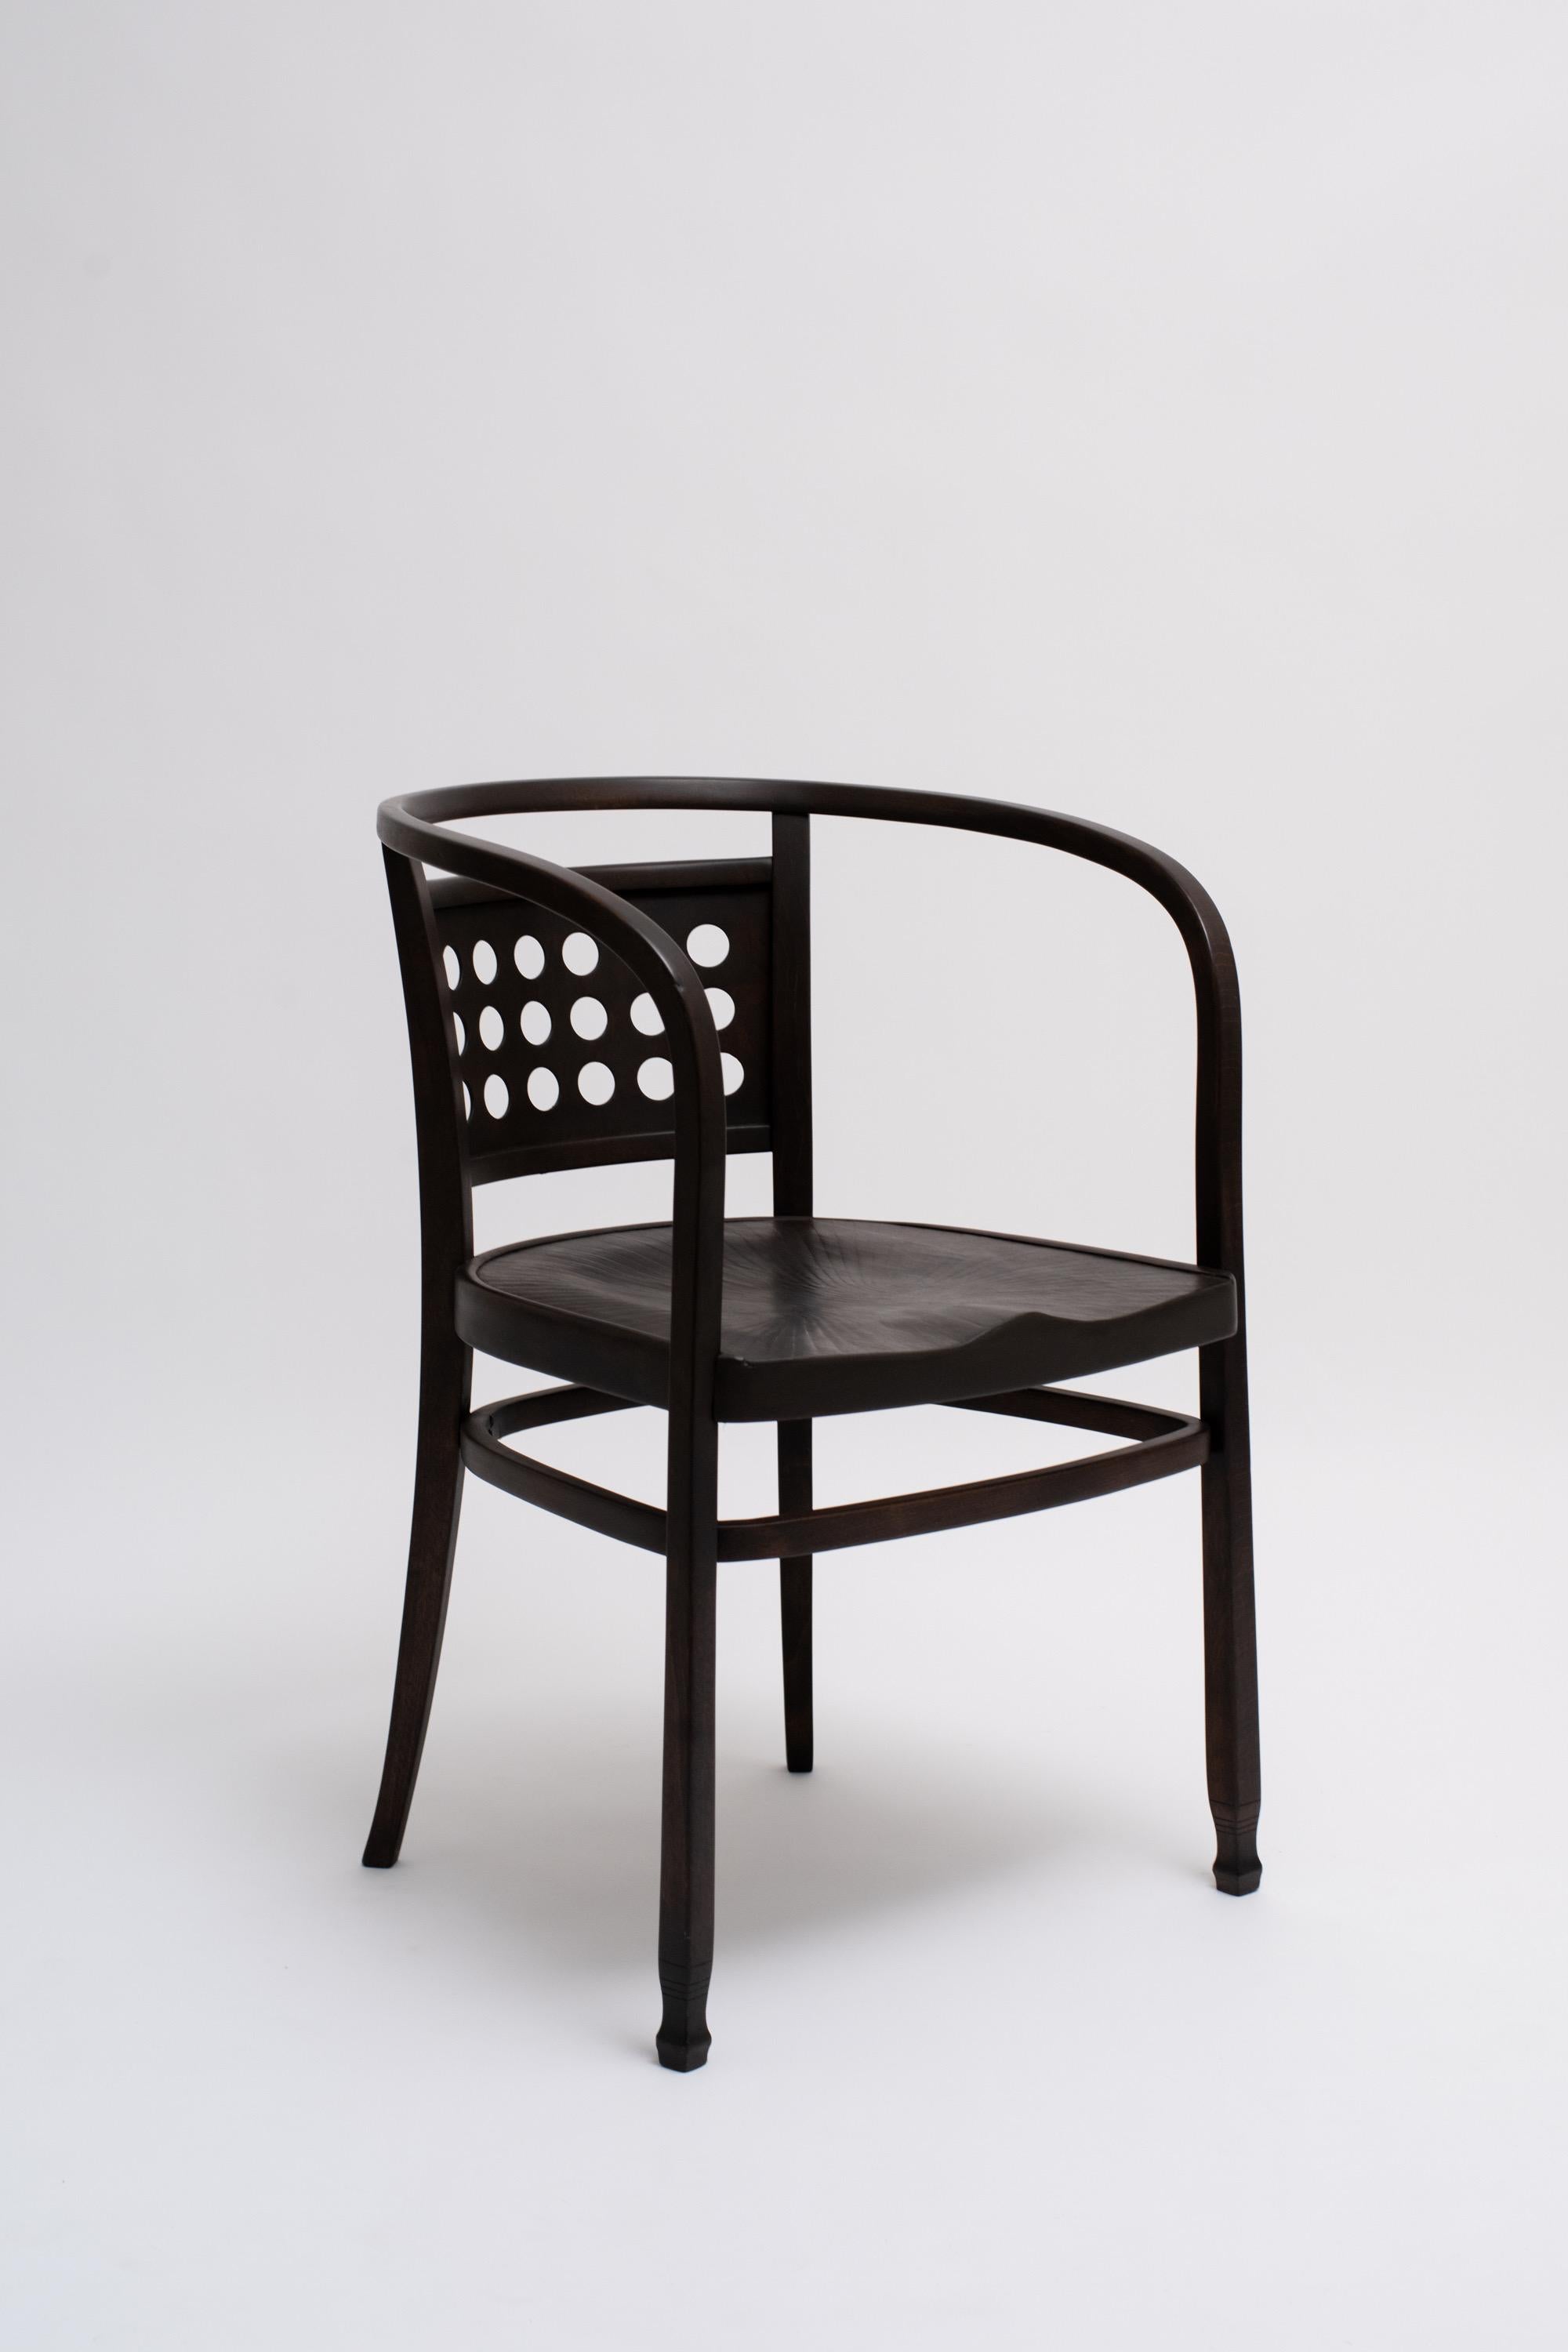 otto wagner armchair